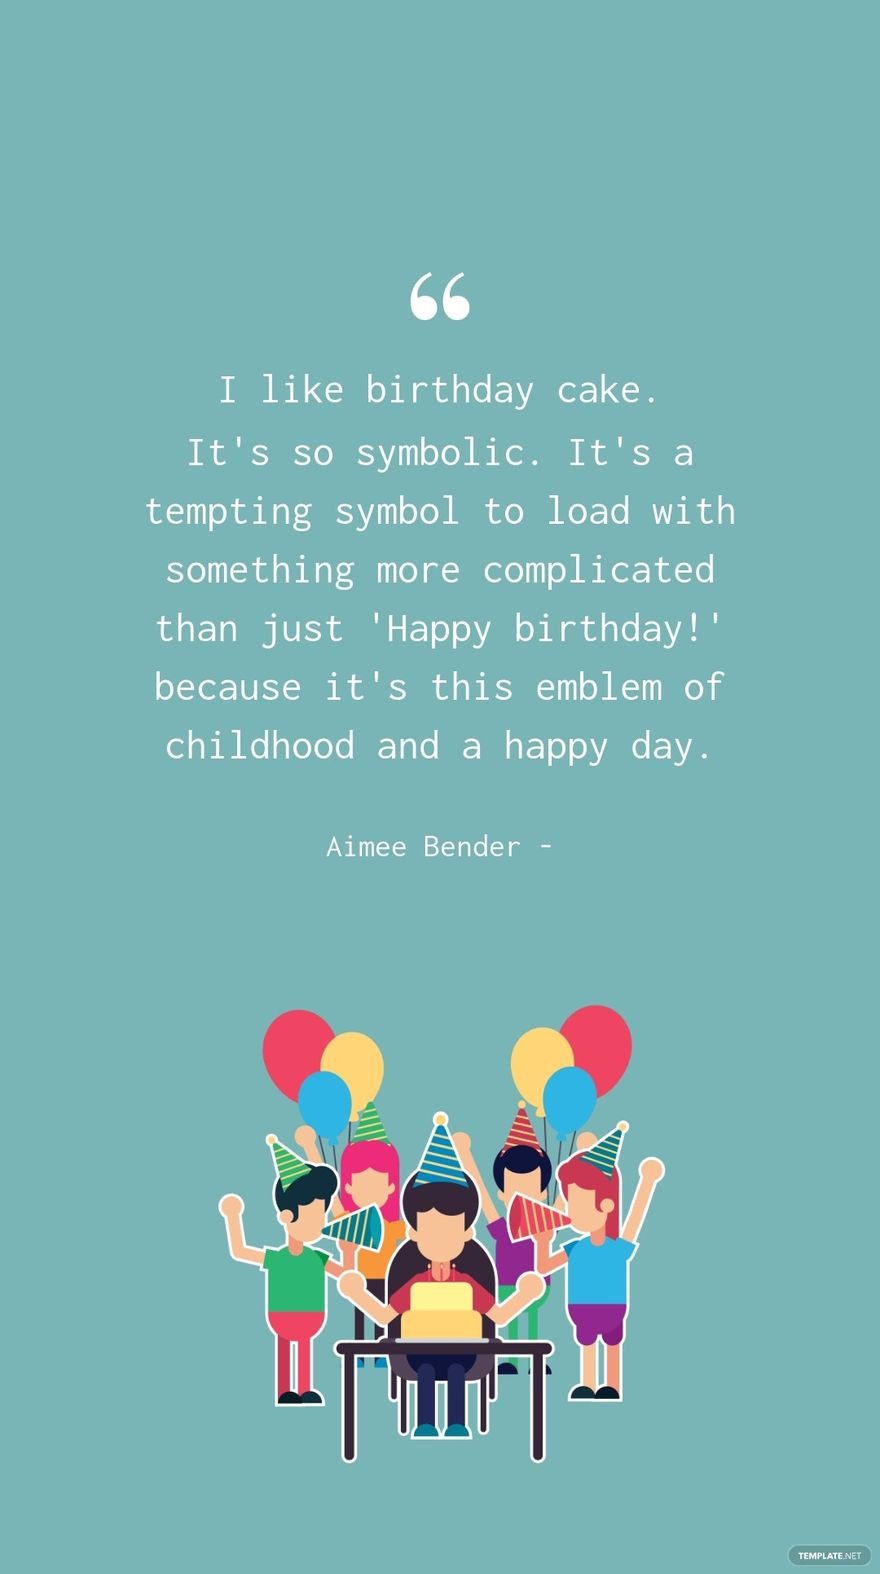 Aimee Bender - I like birthday cake. It's so symbolic. It's a tempting symbol to load with something more complicated than just 'Happy birthday!' because it's this emblem of childhood and a happy day.